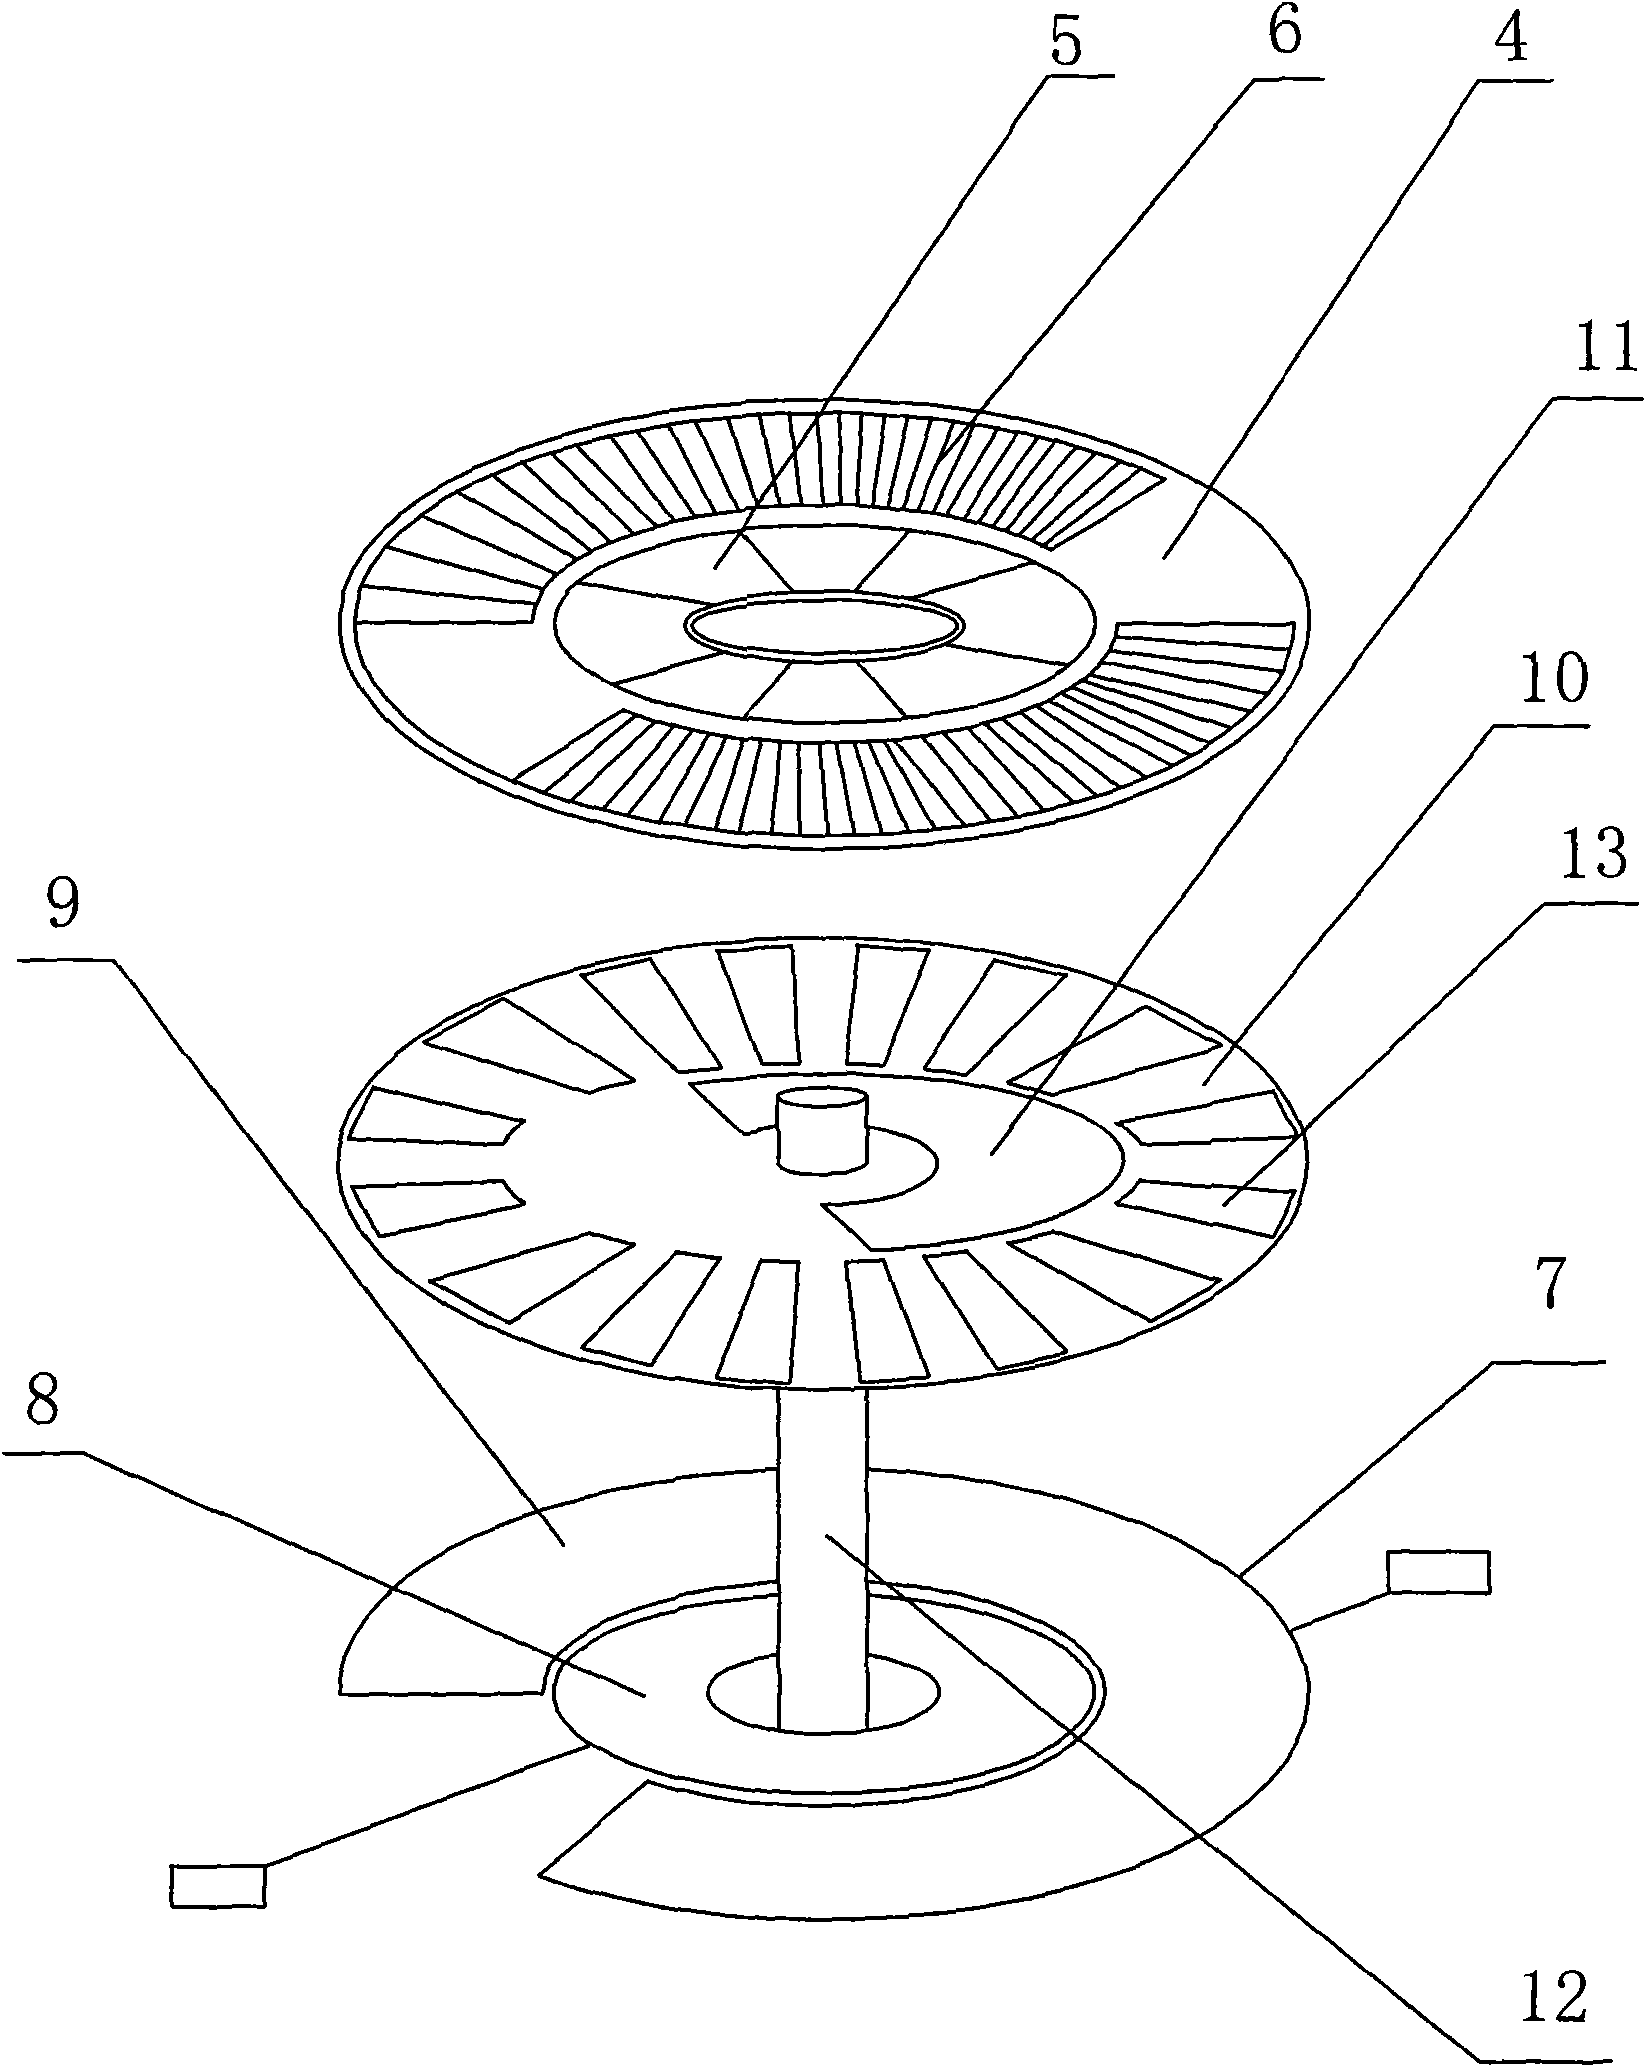 Capacitance measuring sensor device in absolute position